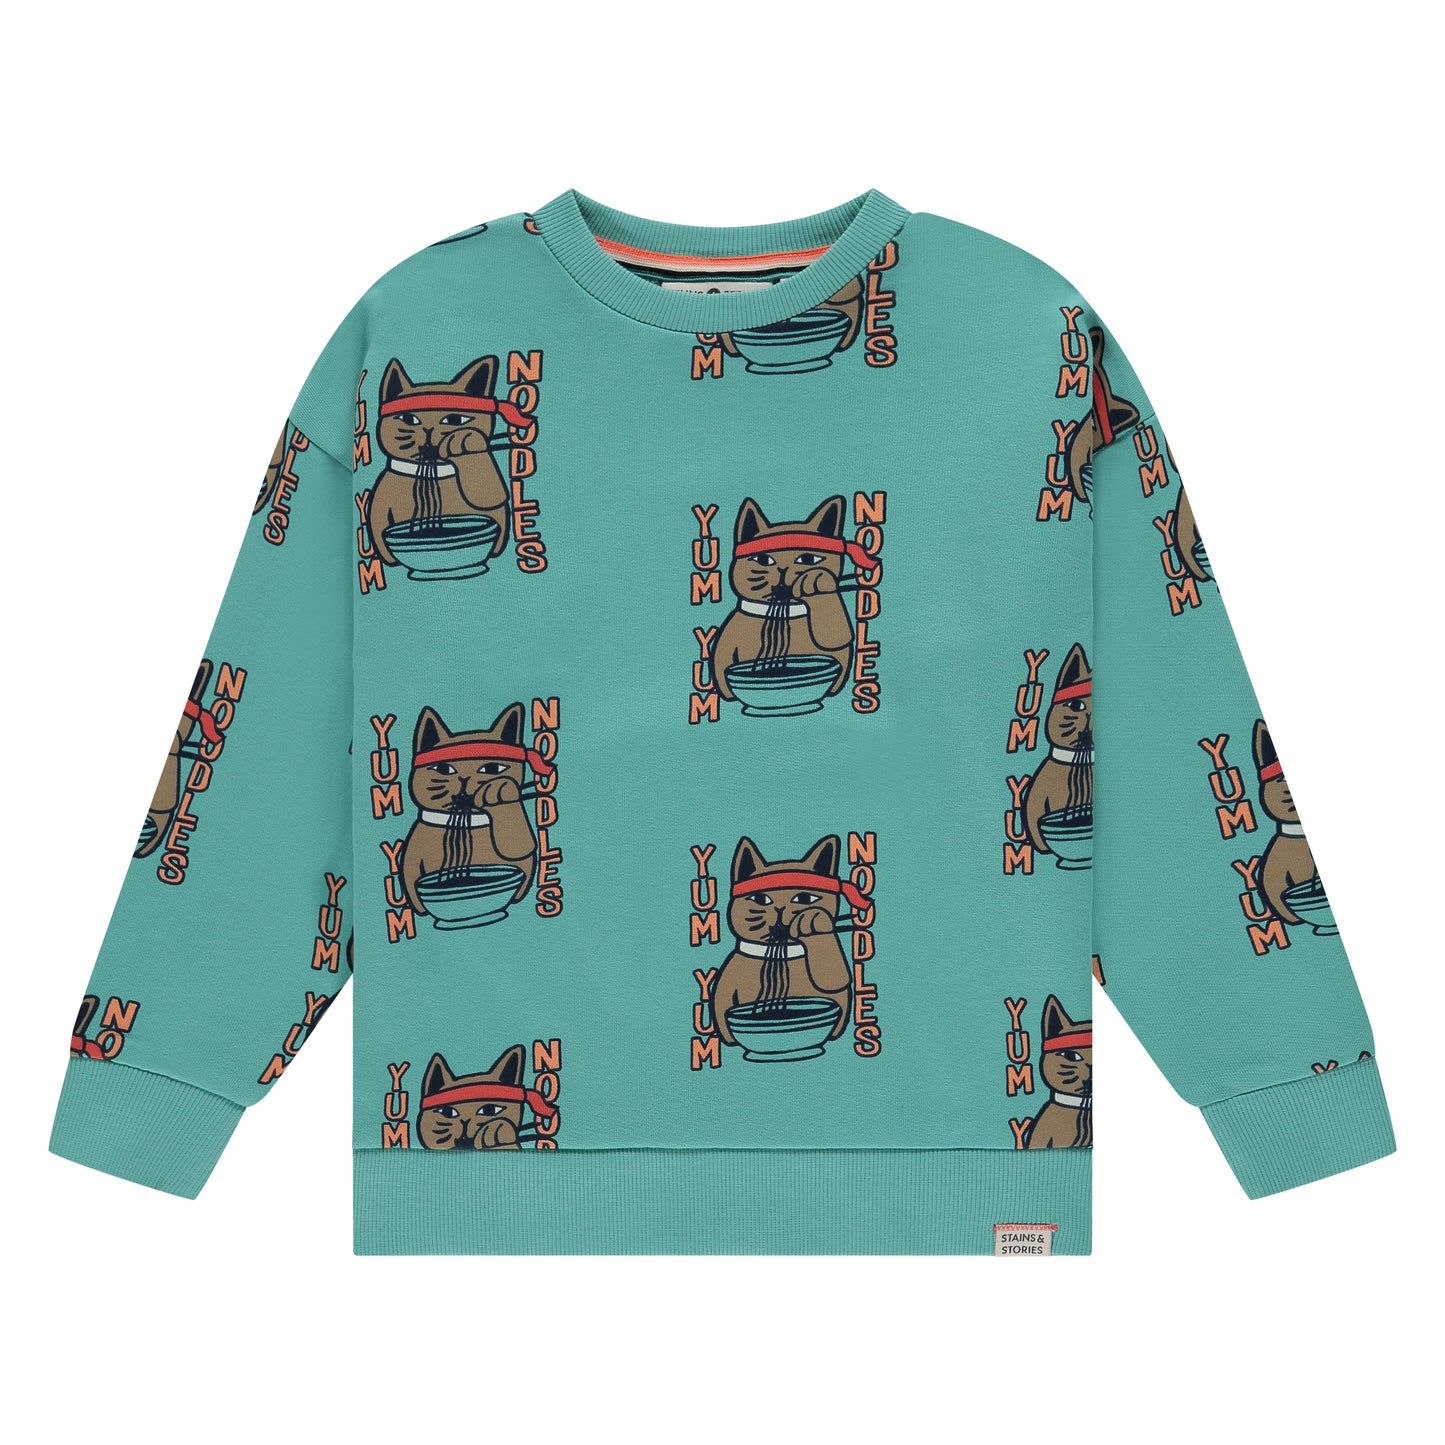 Stains & Stories Sweatshirt - Turquoise